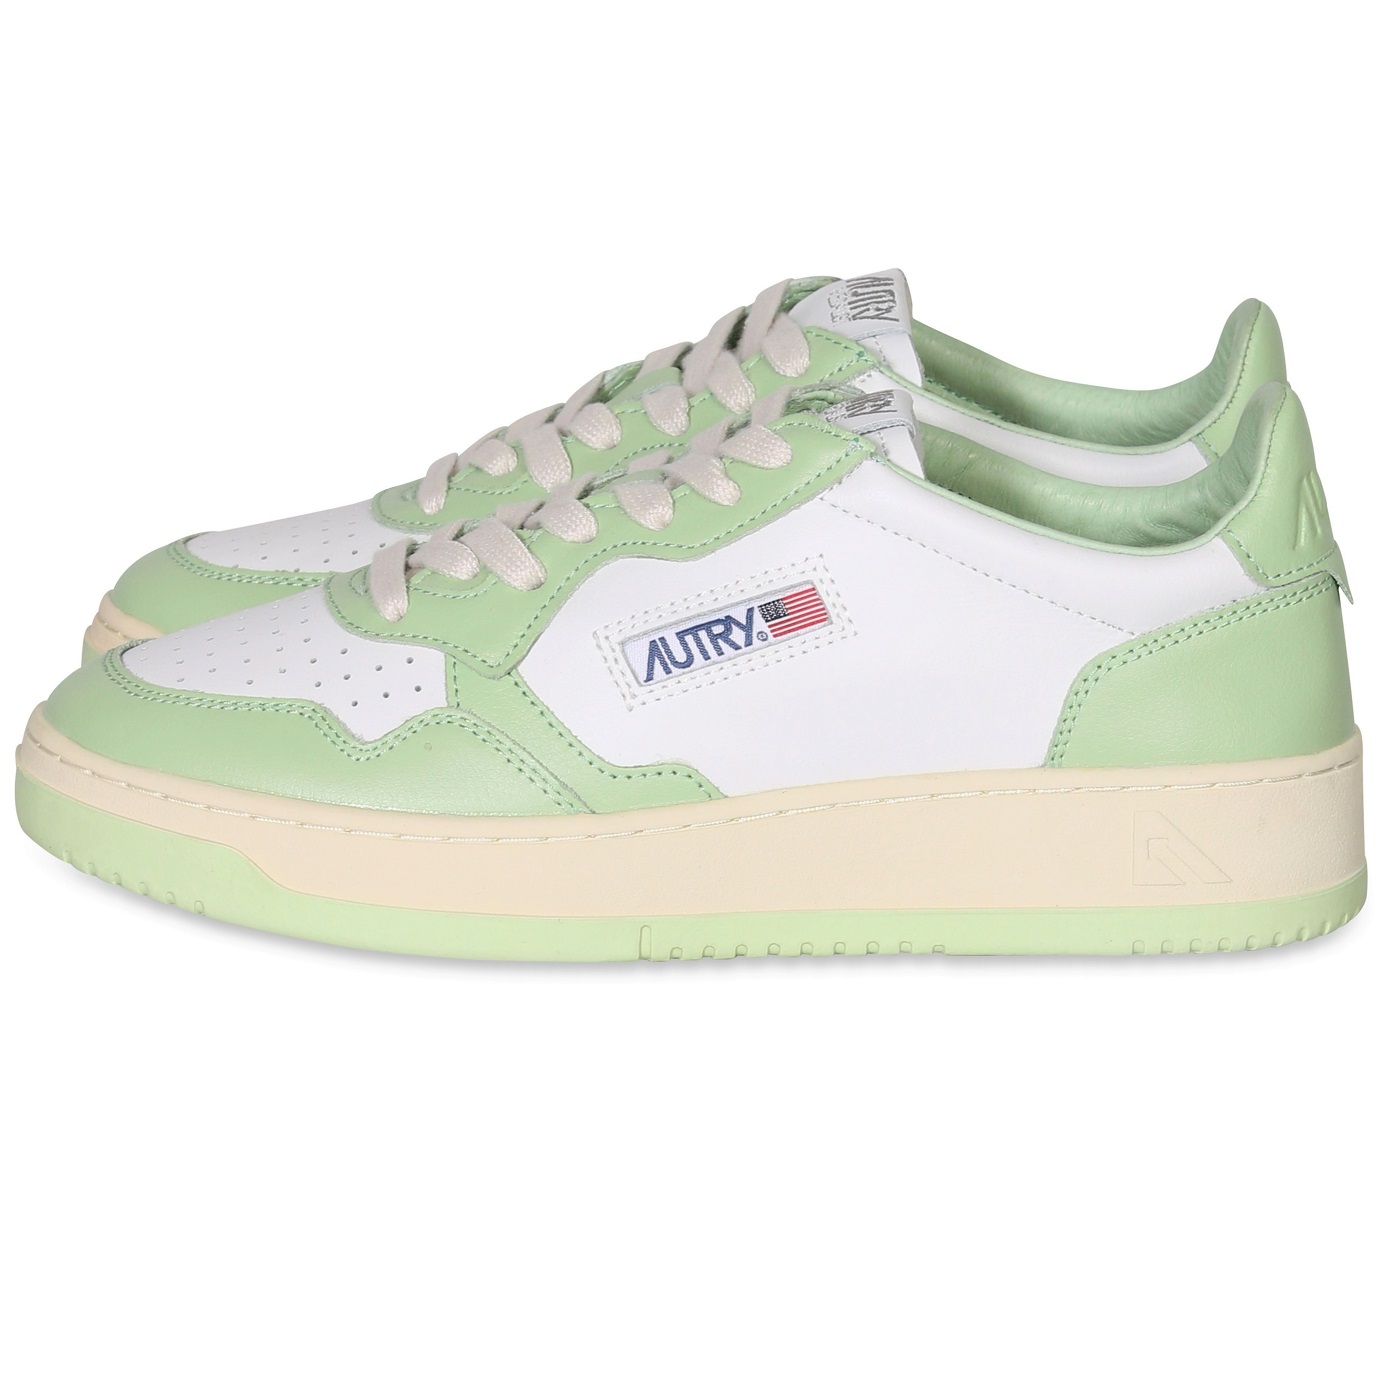 AUTRY ACTION SHOES Low Sneaker White/Nile Green